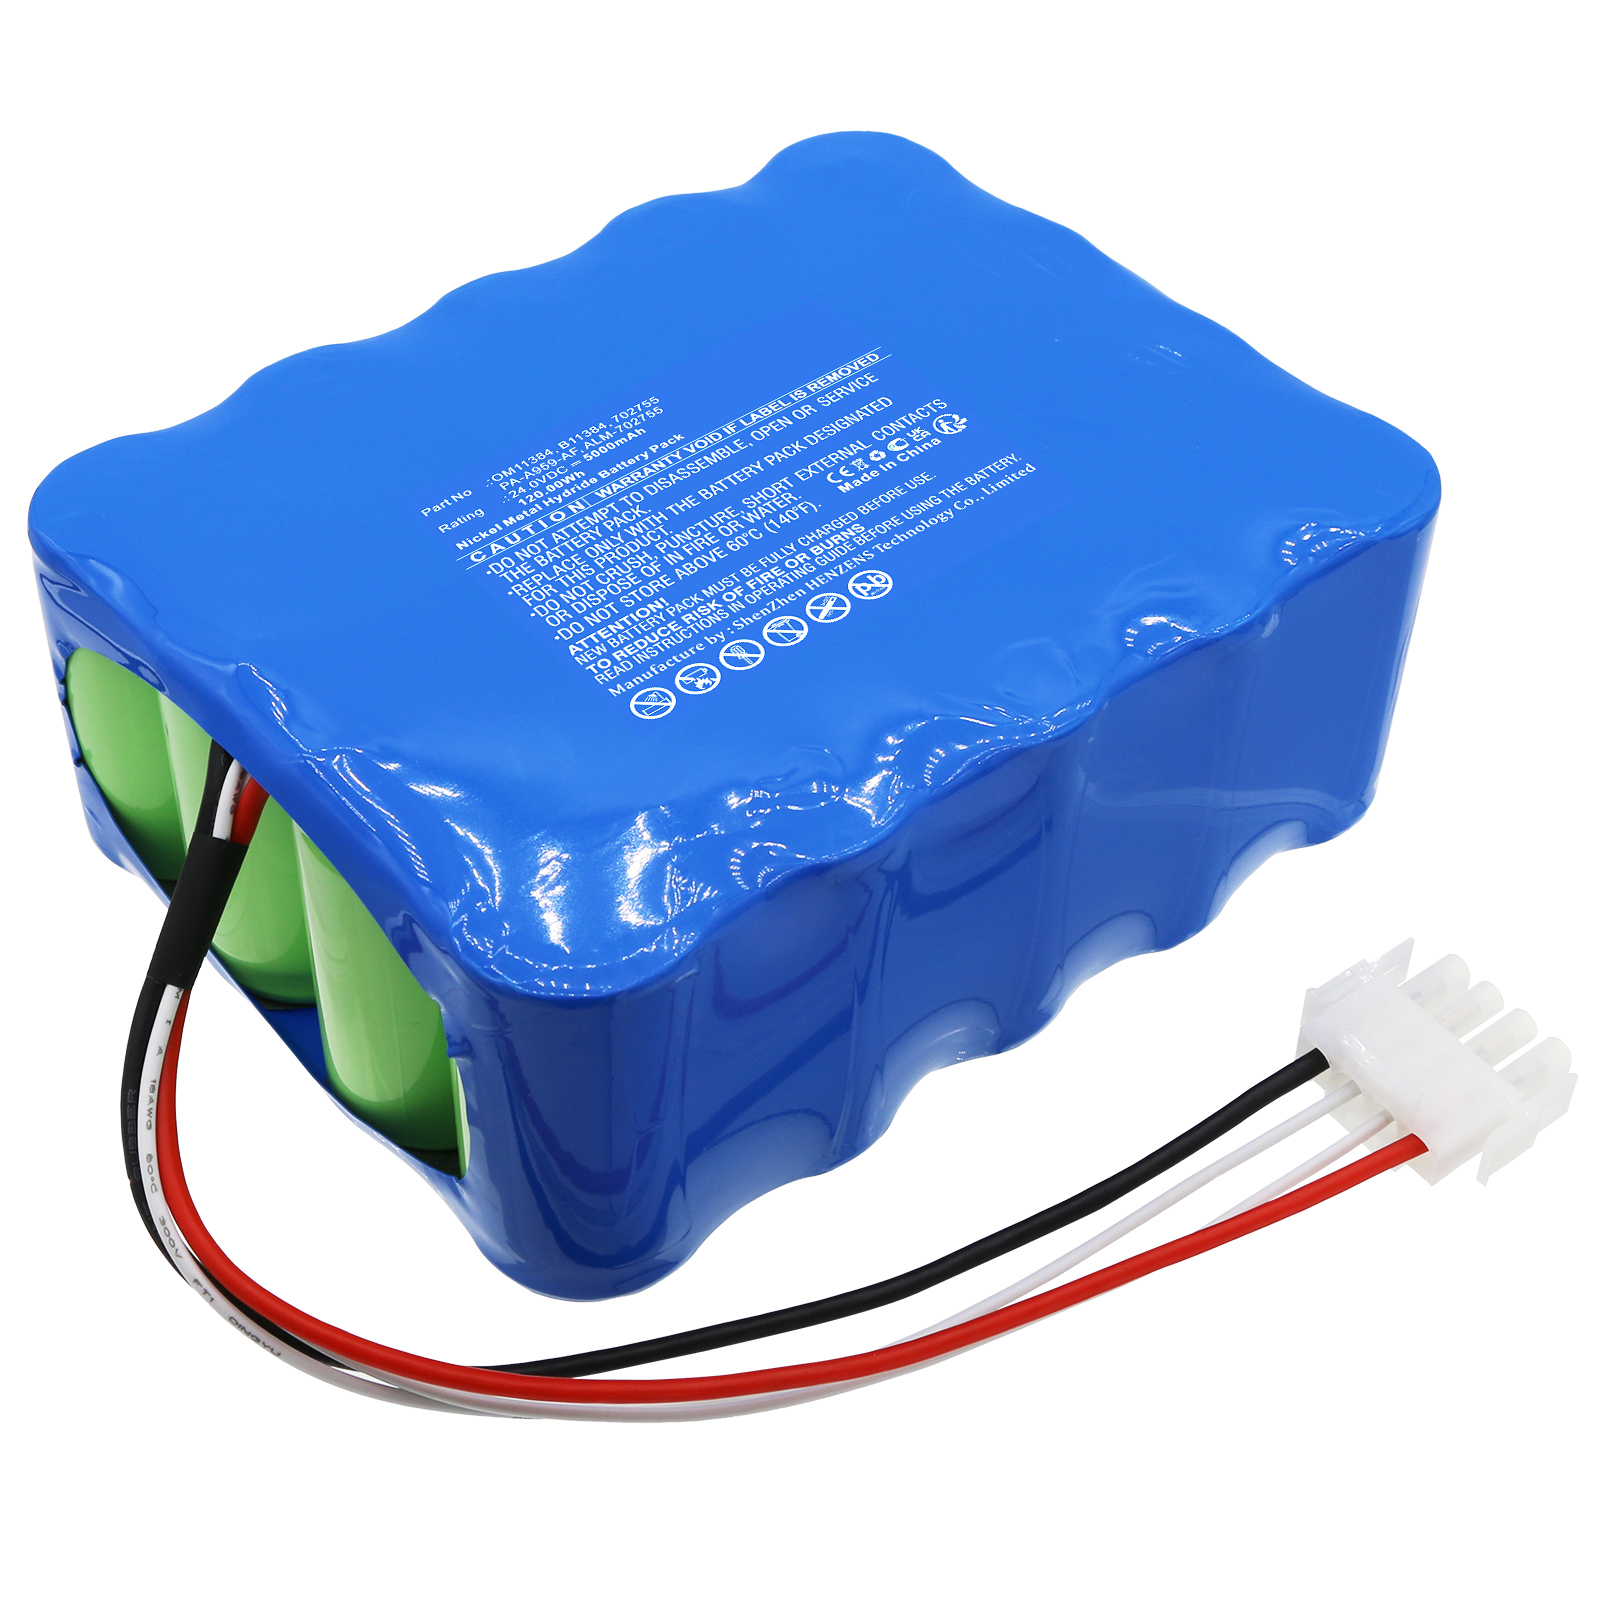 Synergy Digital Medical Battery, Compatible with MAQUET ALM-702755 Medical Battery (Ni-MH, 24V, 5000mAh)